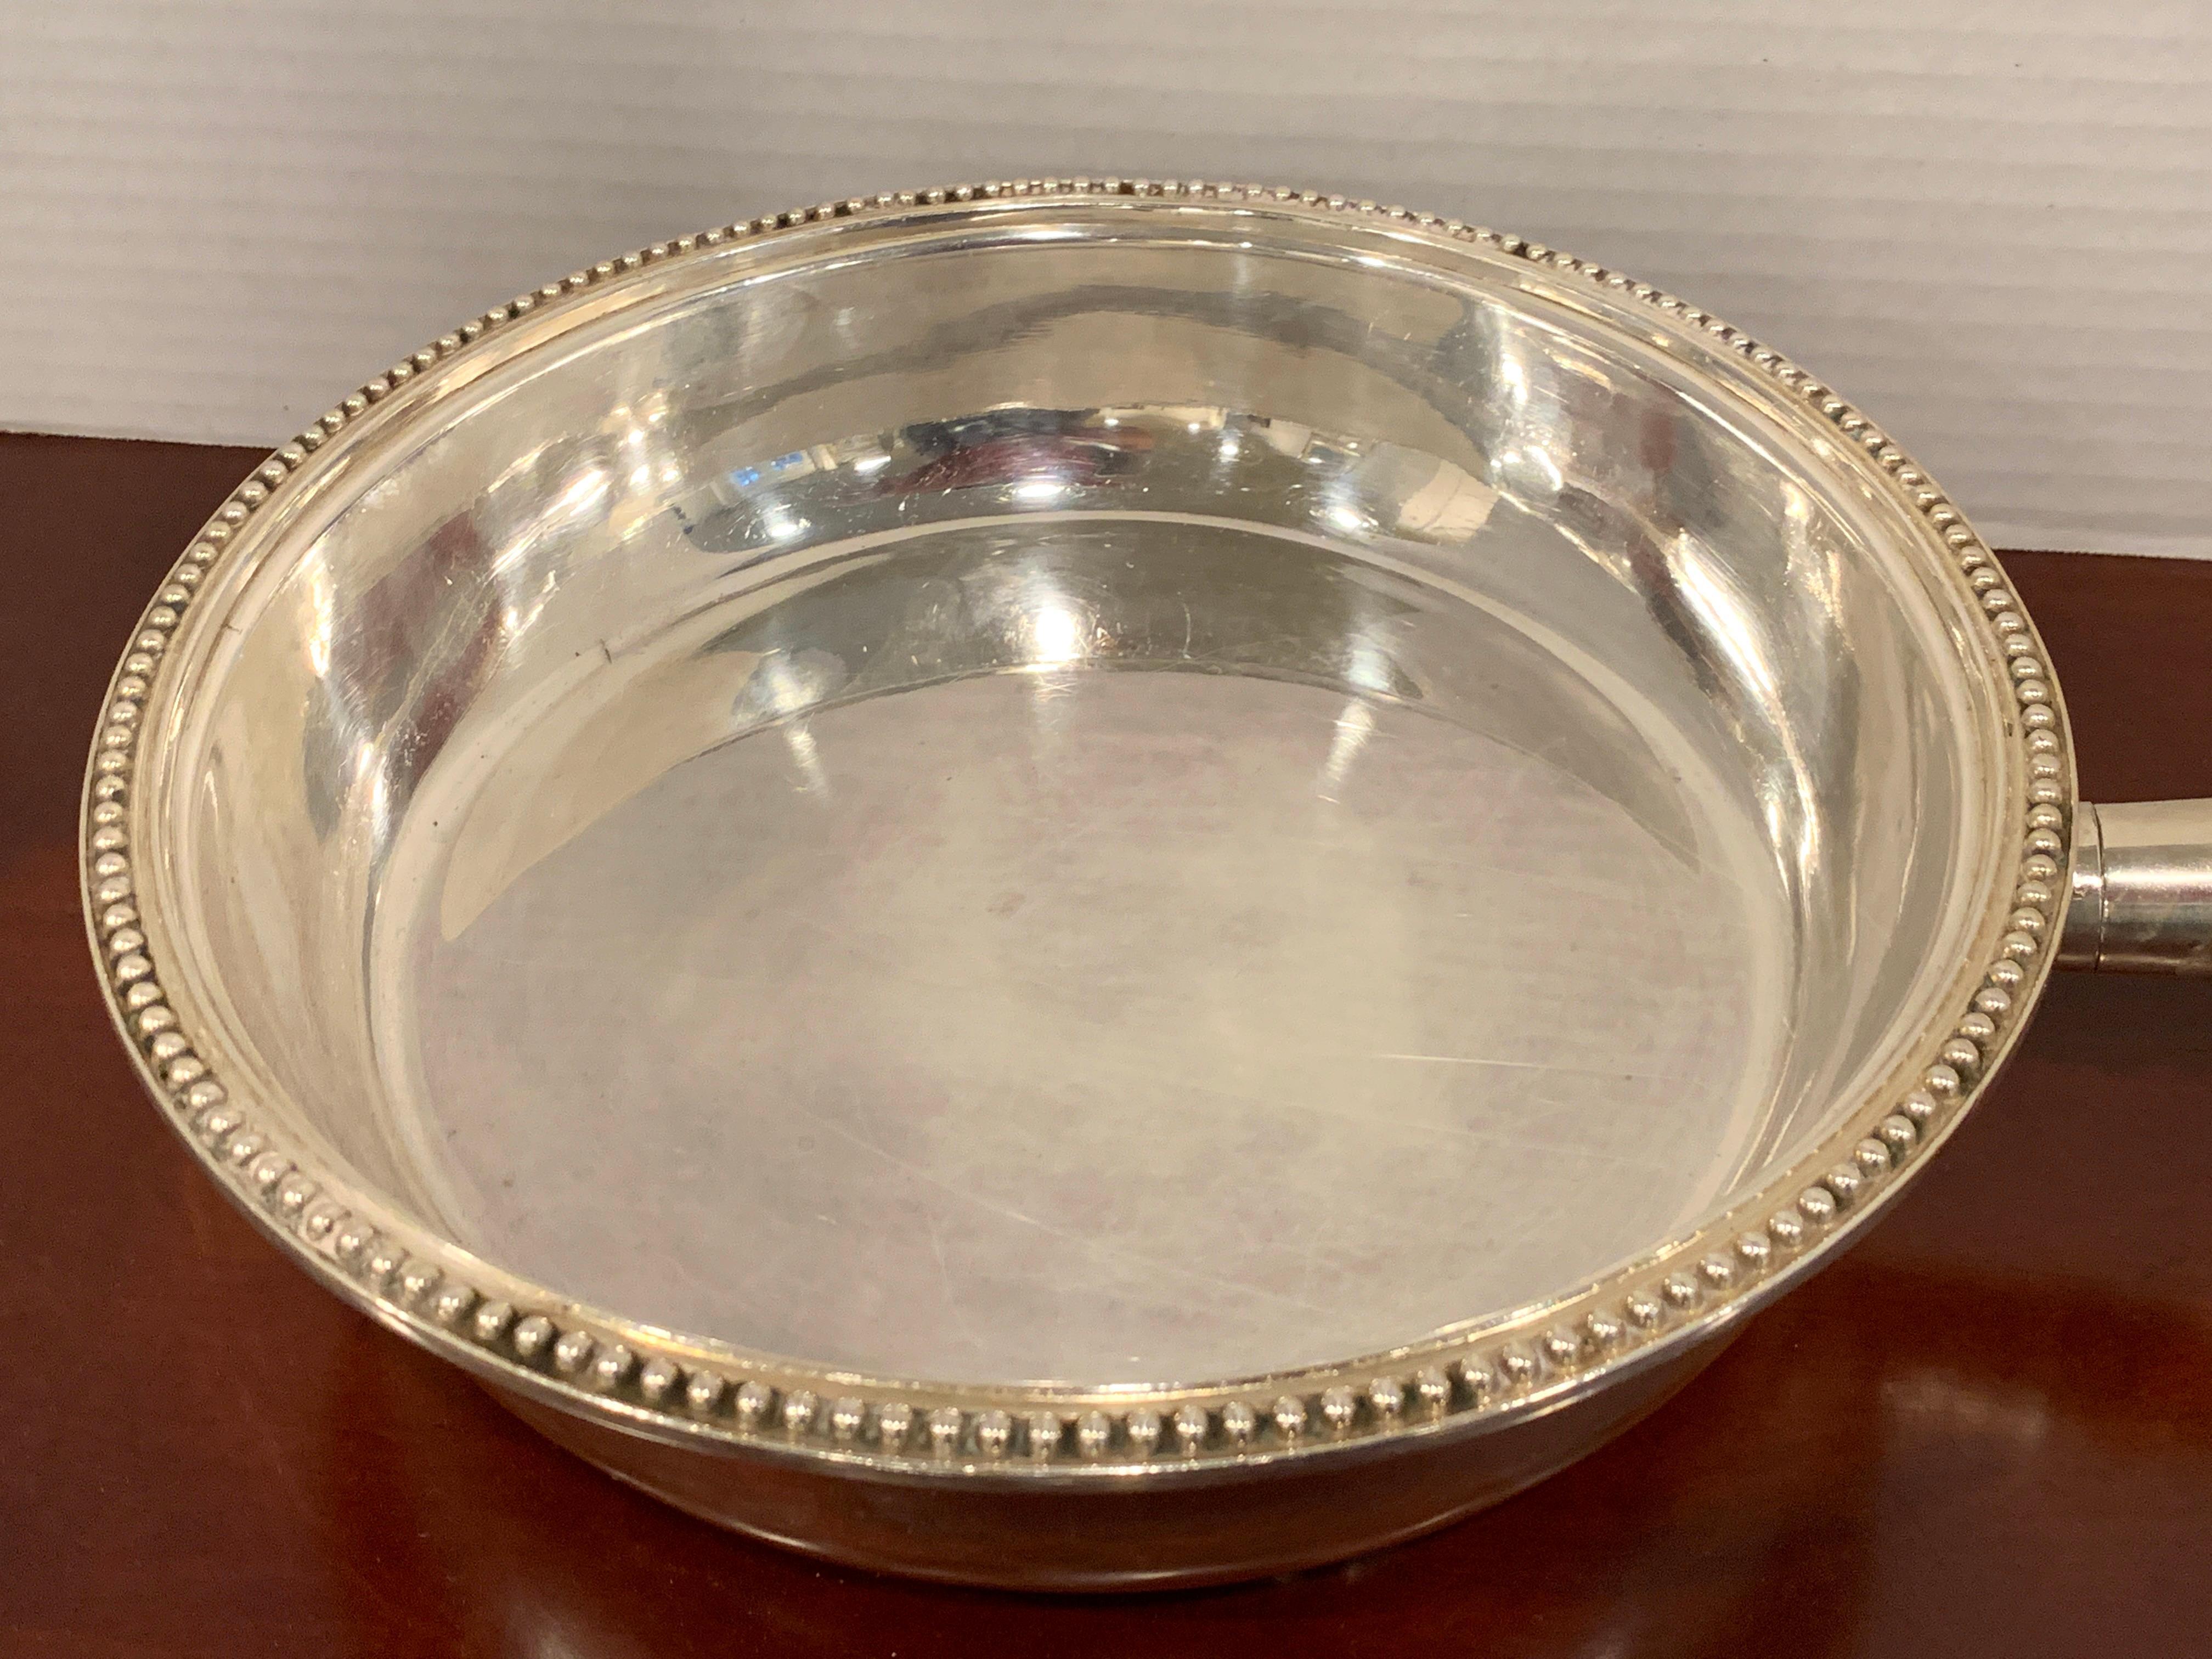 Antique English Silver Plated Warming Supper Dish by Henry Wilkinson & Co. For Sale 3